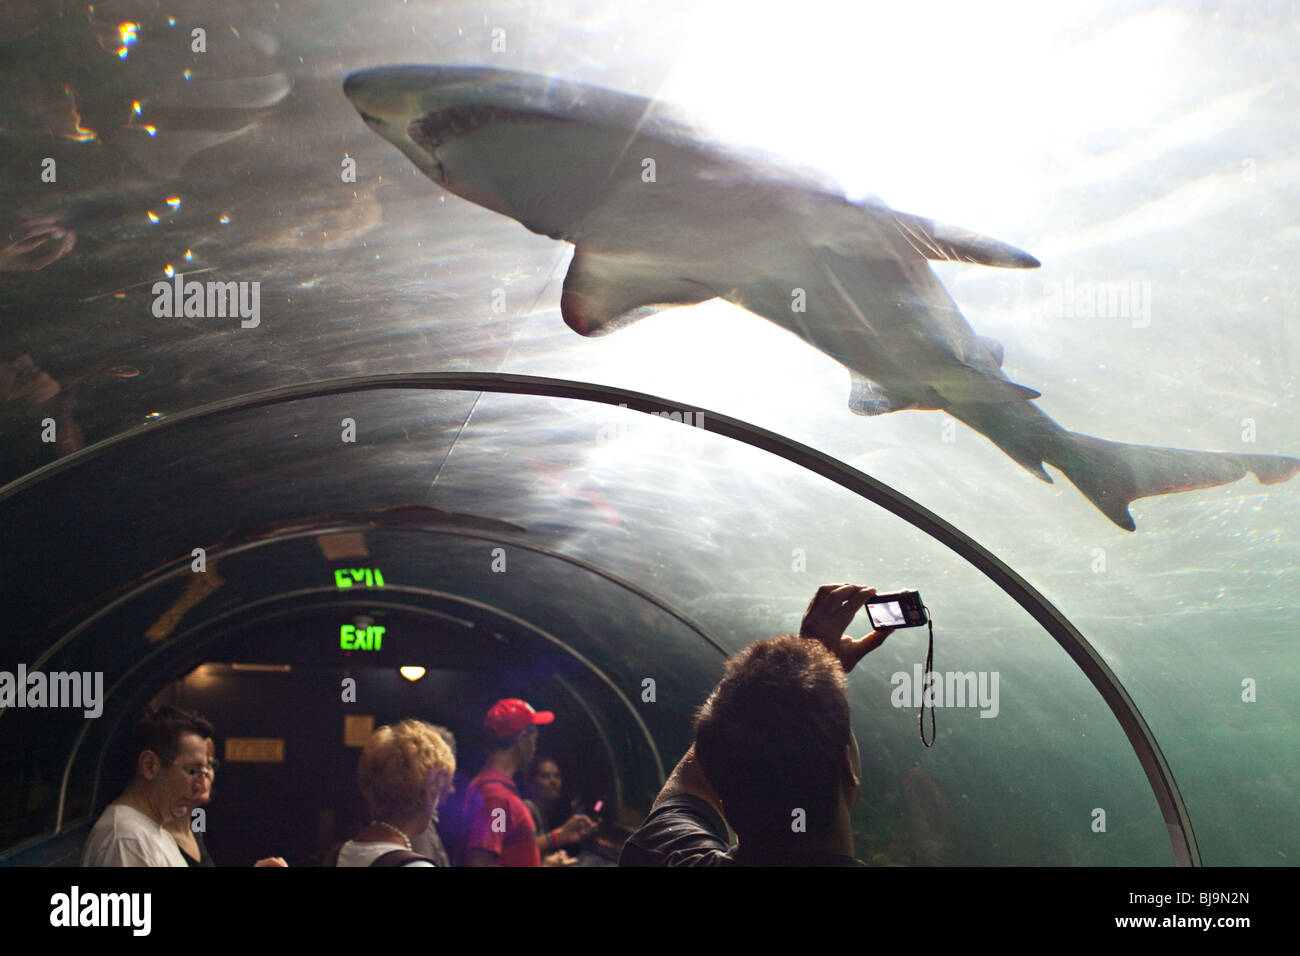 Tourists photographing sharks and stingrays in Sydney Aquarium ...